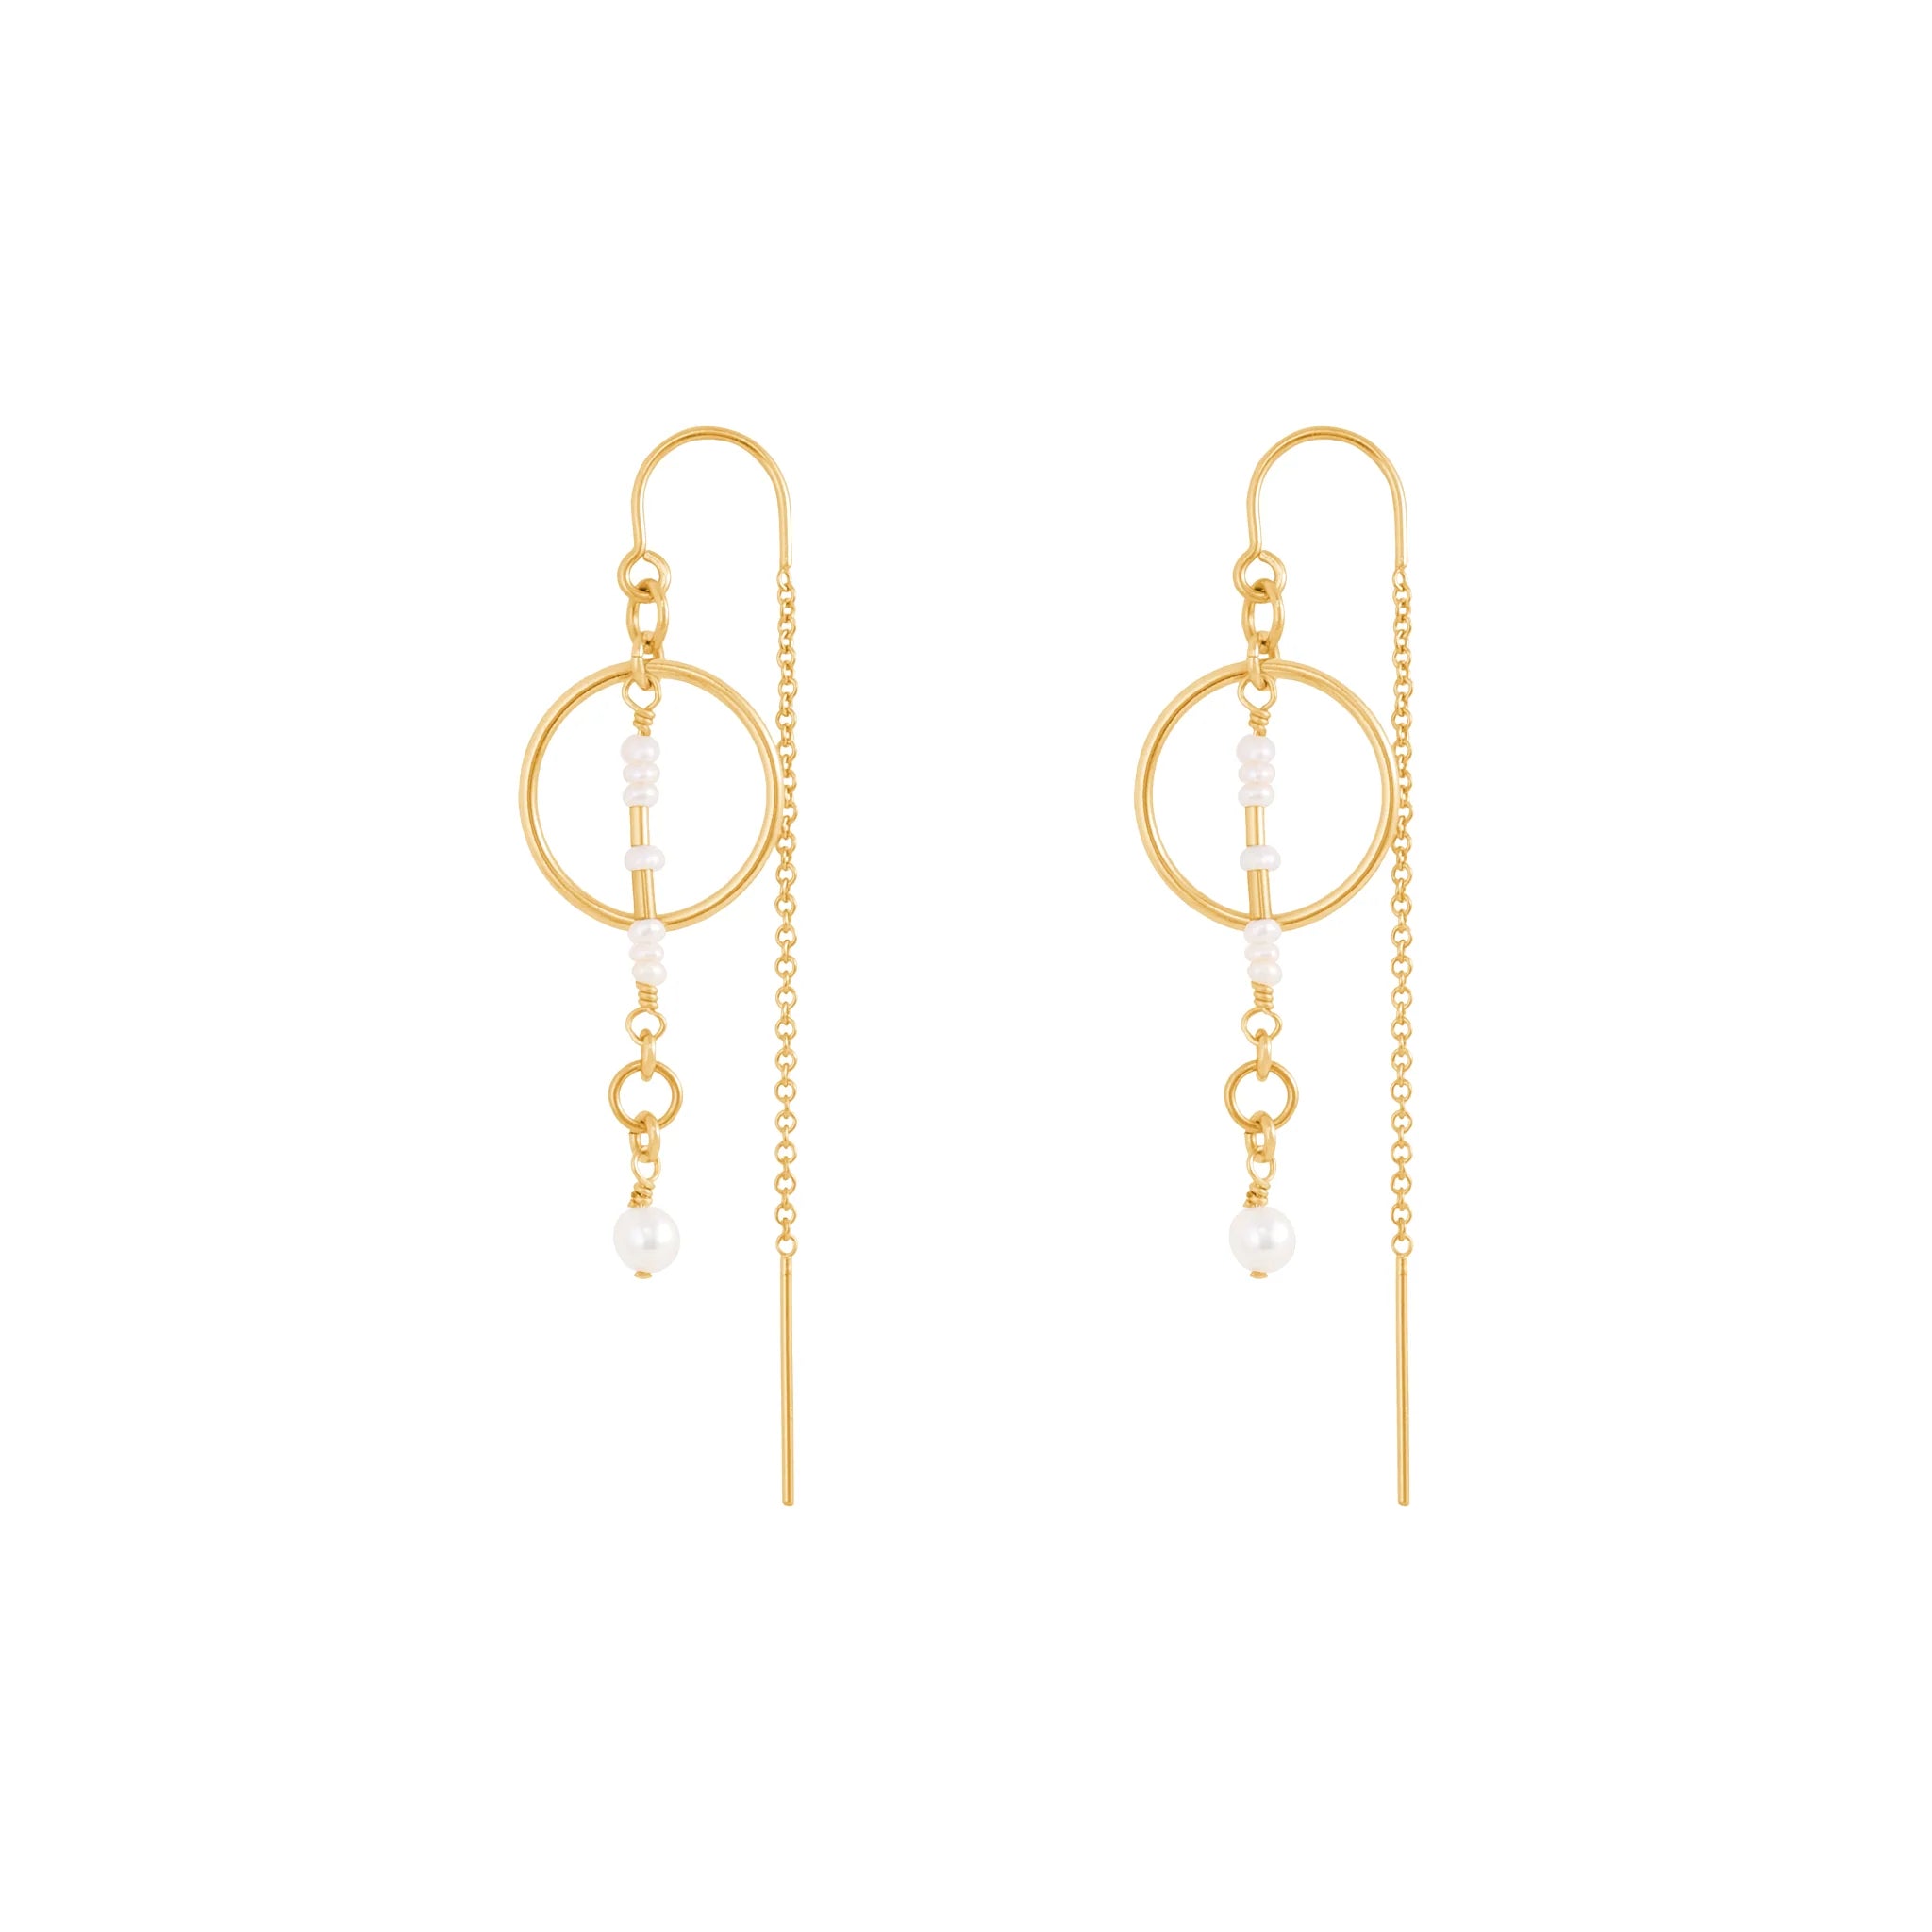 Alana Maria Gabrielle Earrings, Gold – Lily and Mitchell